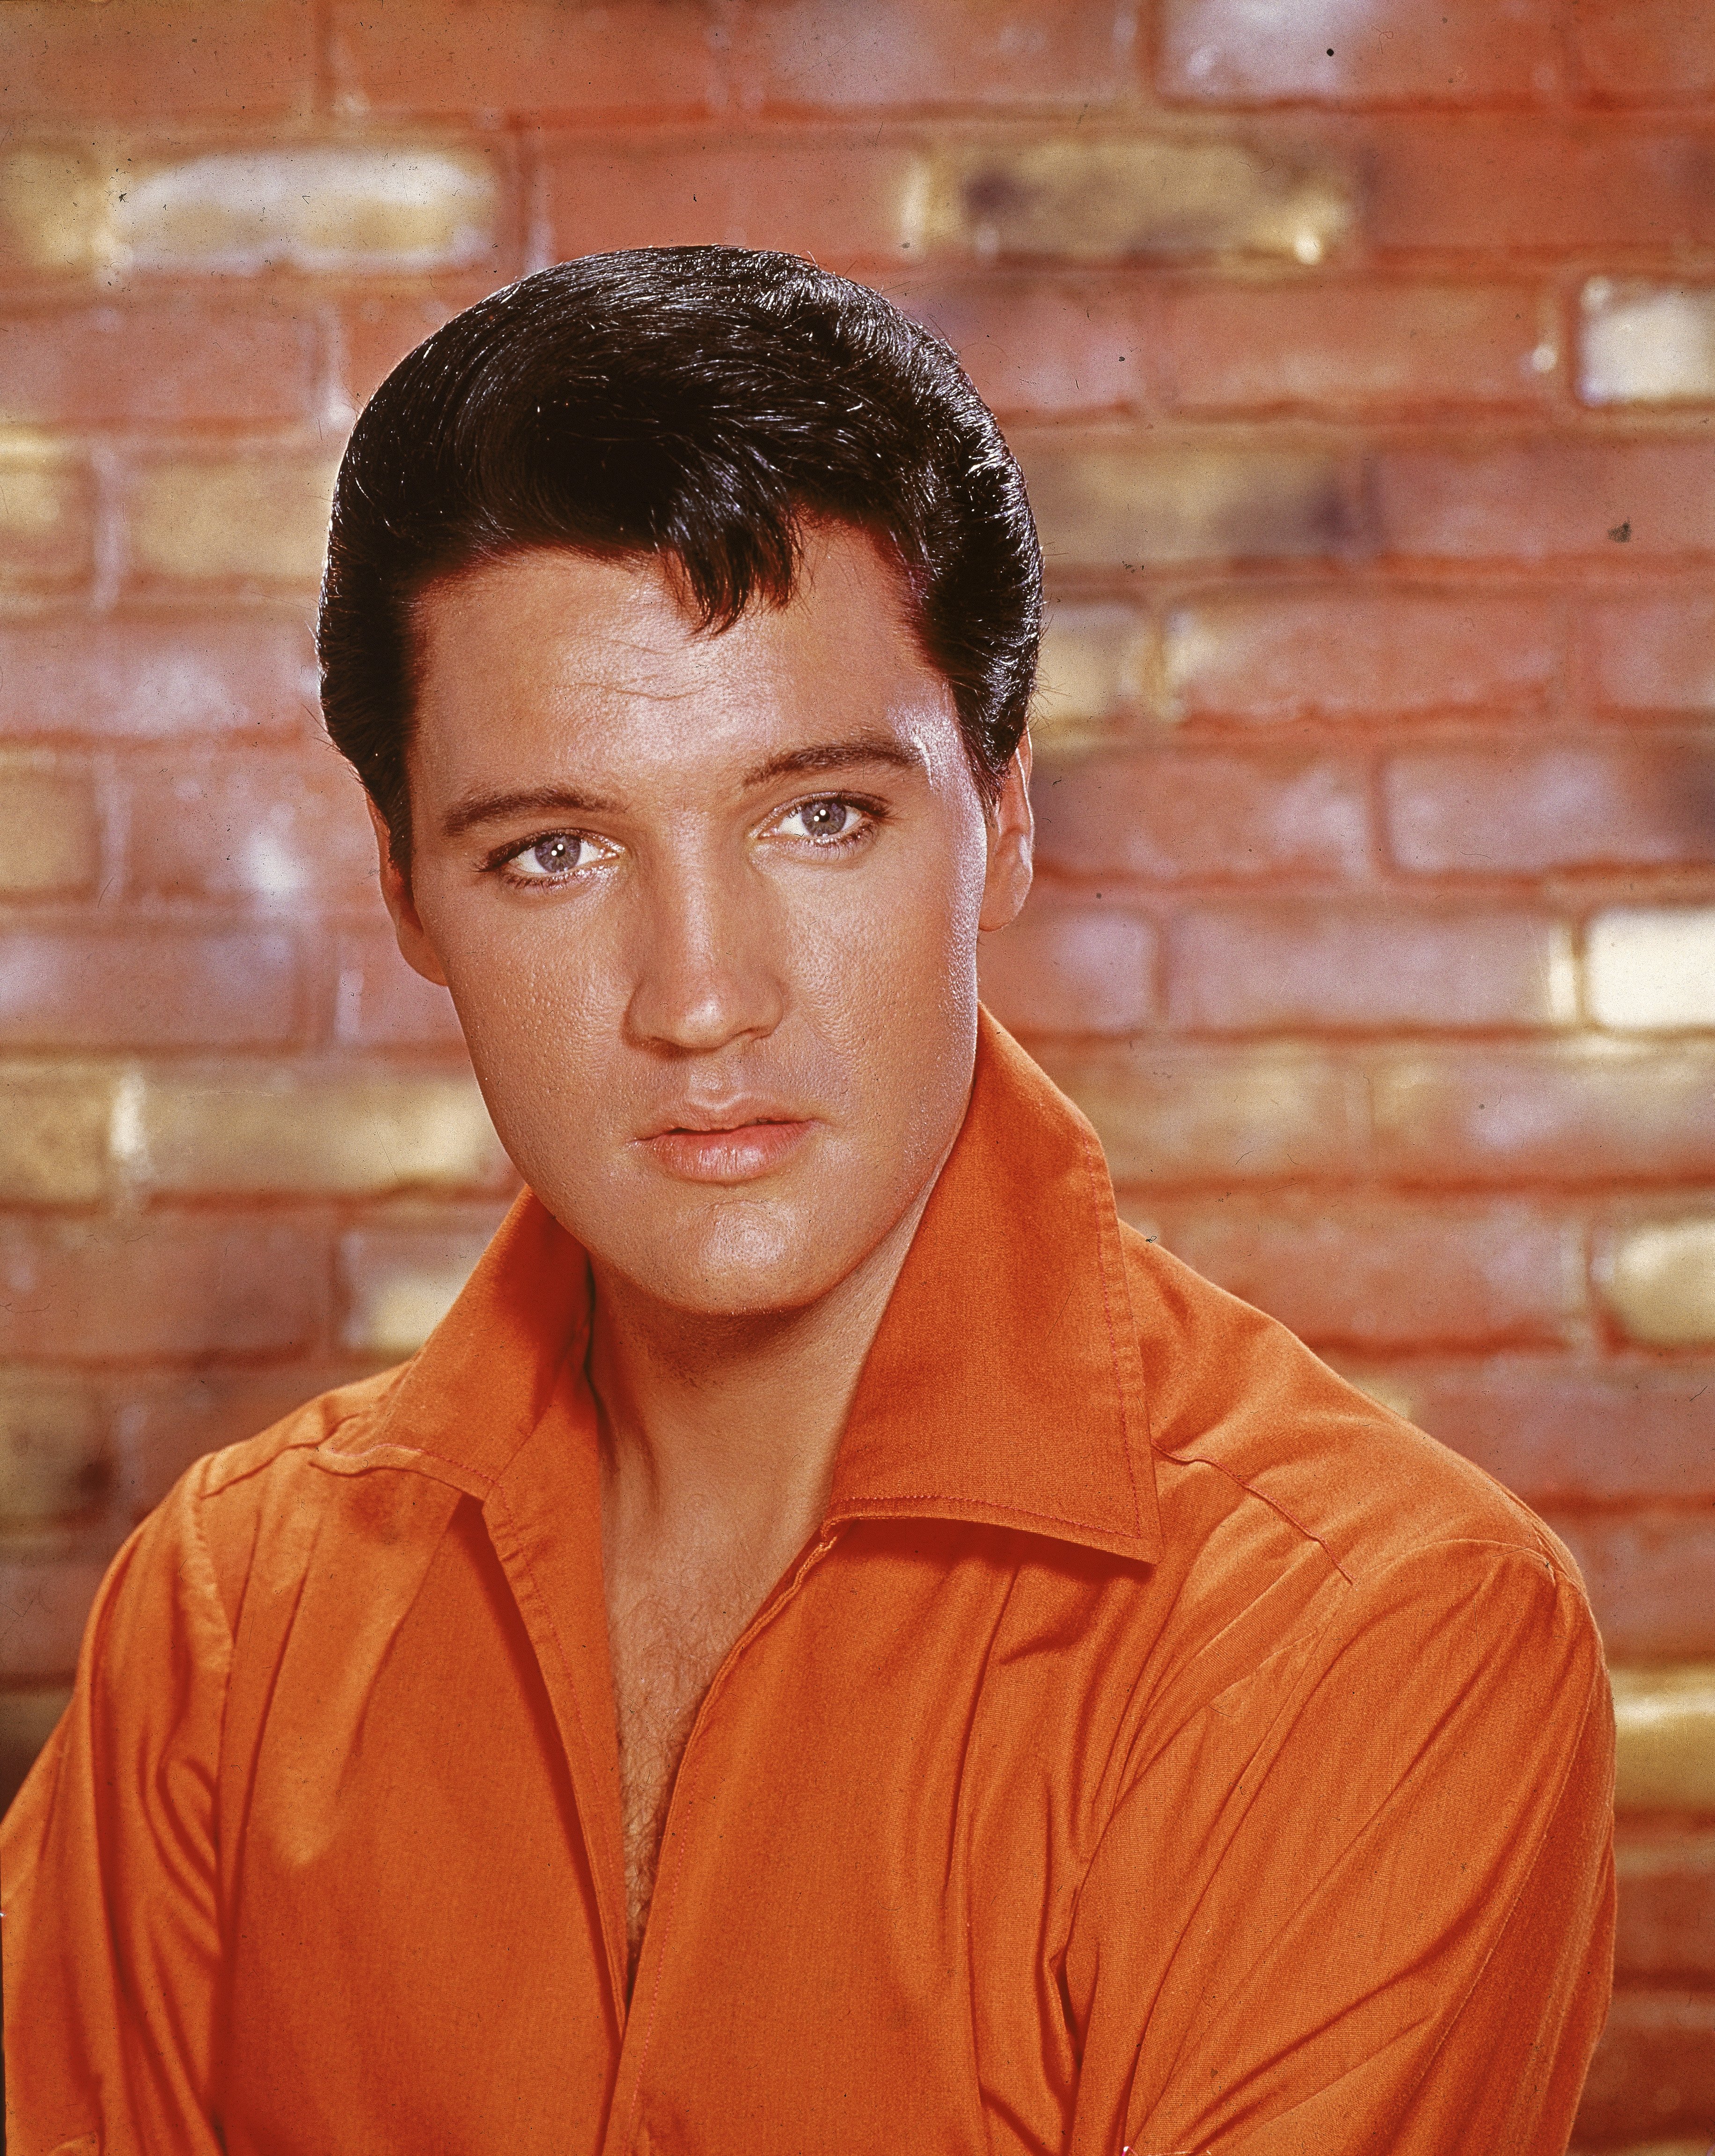 Portrait of American rock and roll singer Elvis Presley, dressed in an orange open-neck shirt and in front of a brick wall, mid 1960s | Source: Getty Images